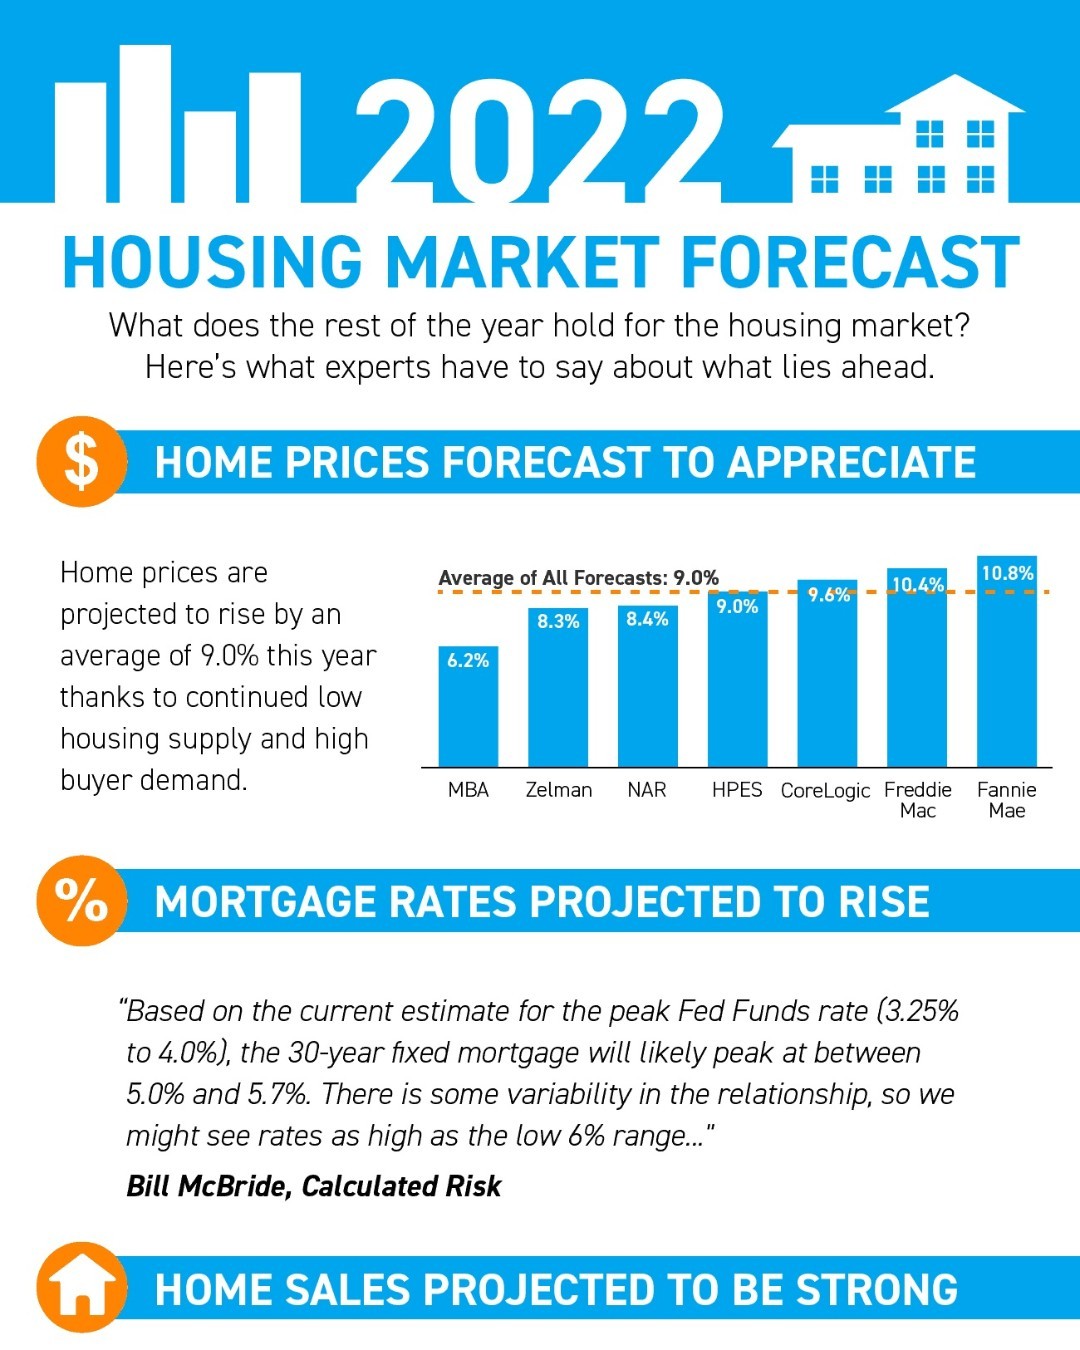 Home prices are projected to rise and so are mortgage rates. Experts are also forecasting another strong year for home sales... Ralene Nelson | DRE# 01503588 | Re/Max Grupe Gold | 707-334-0699 #riovistarealtor #riovistarealestate #realestatenews